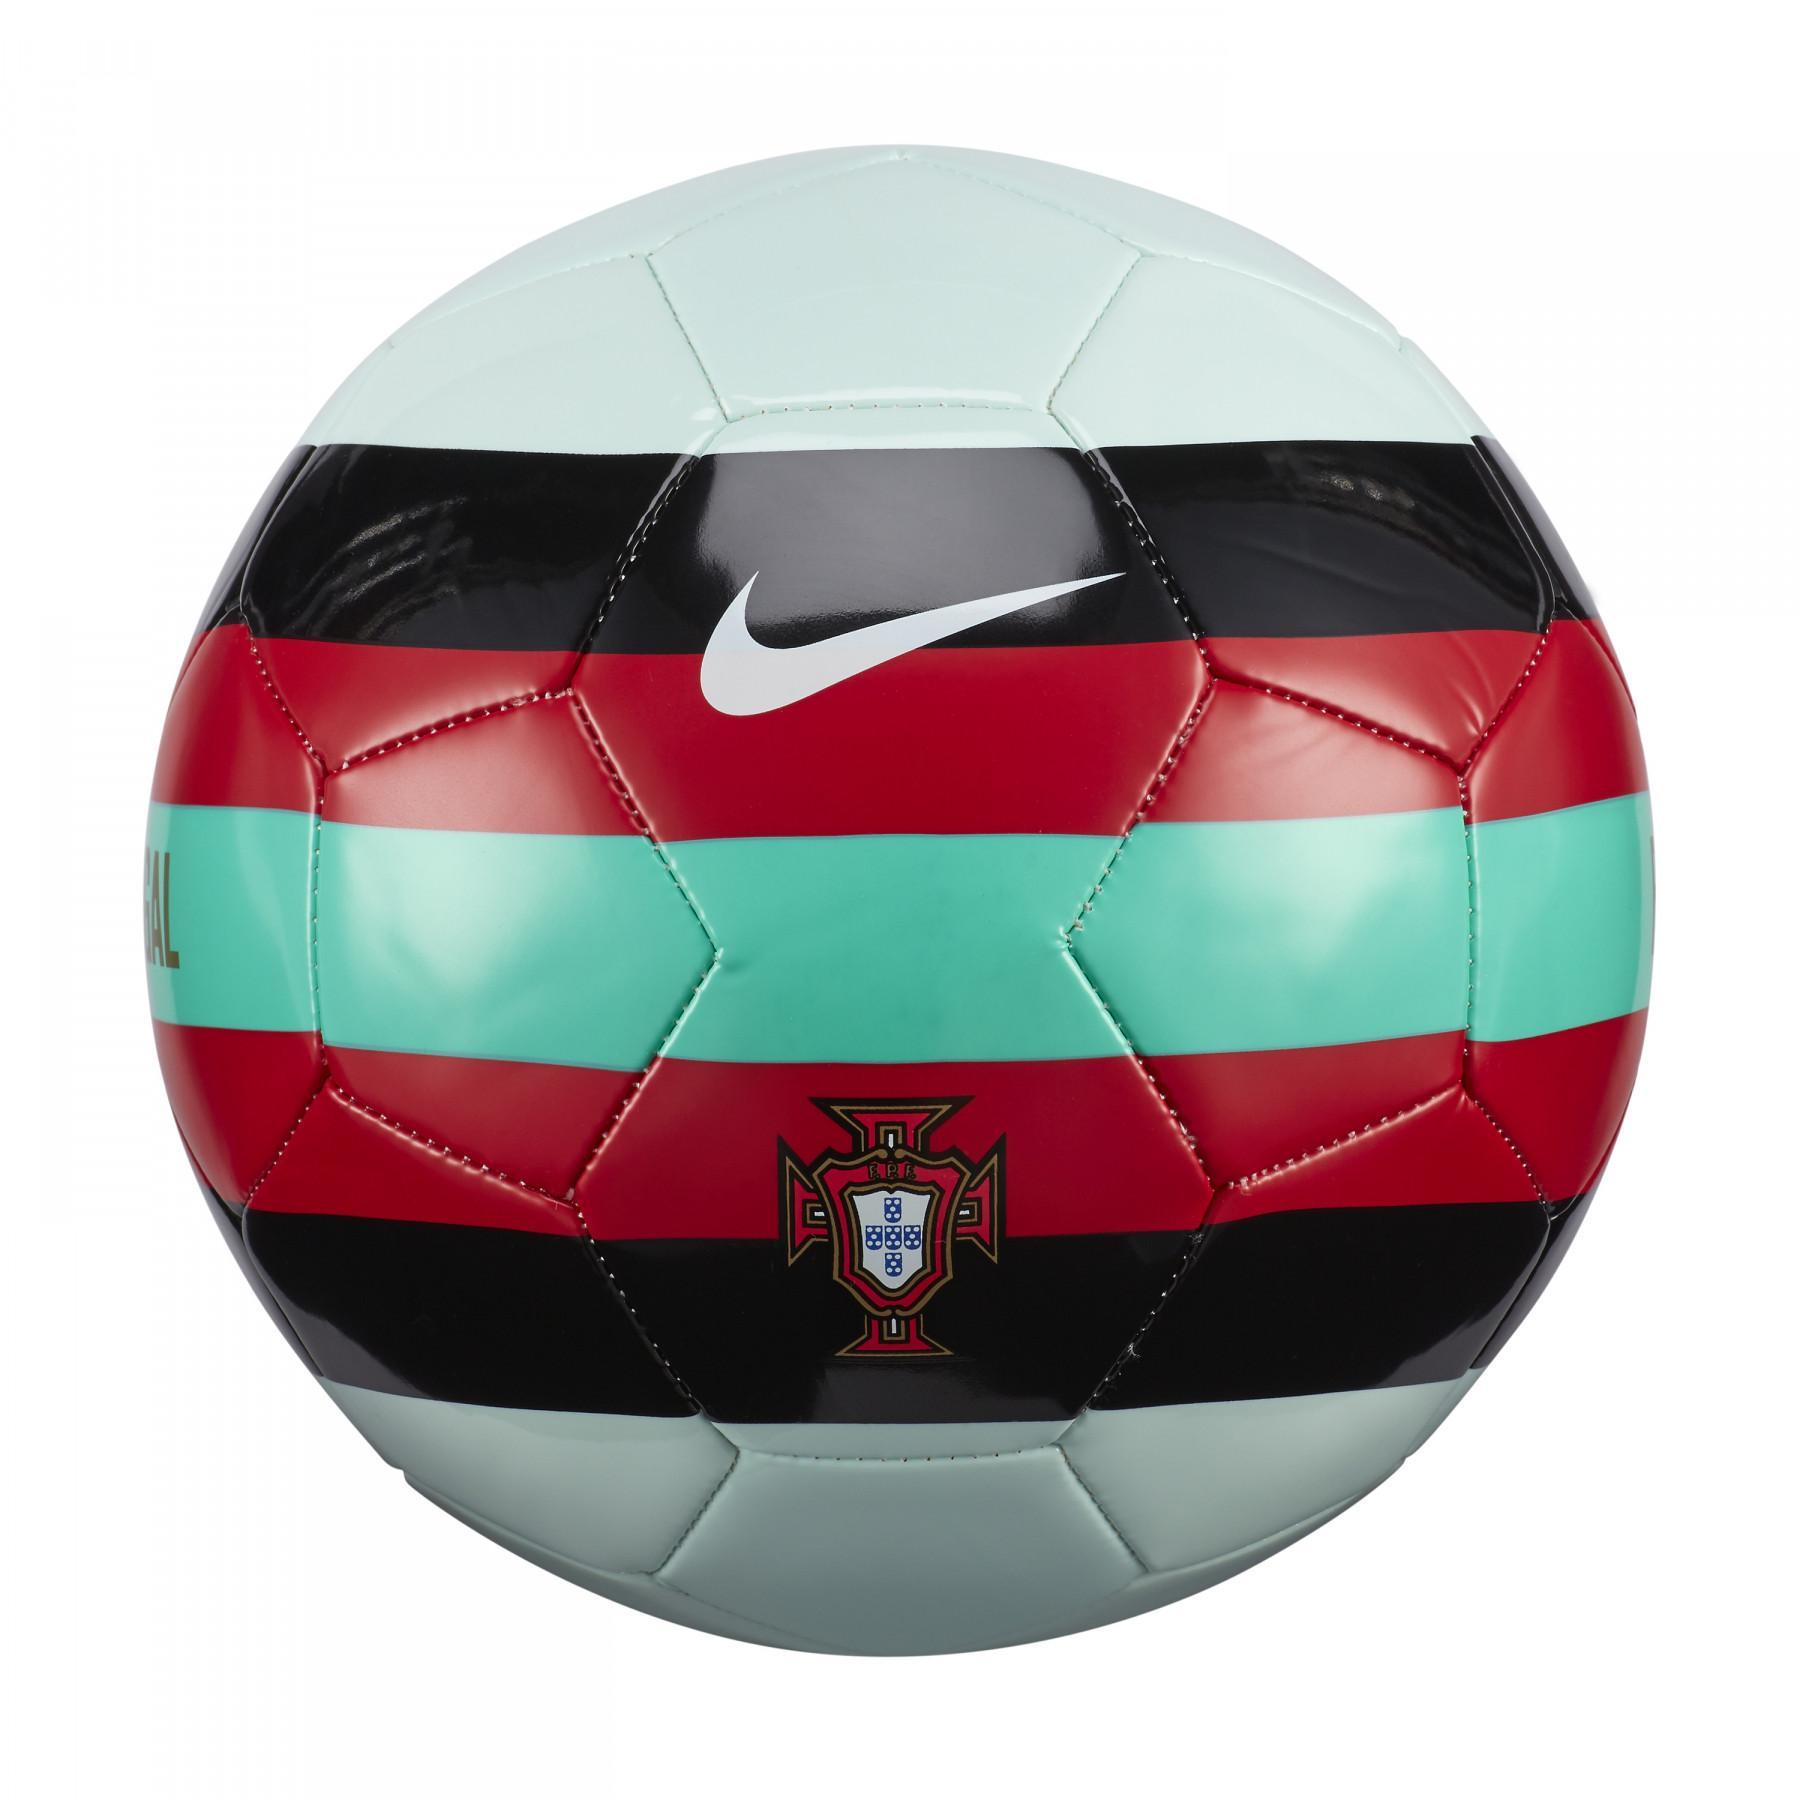 Ballong Portugal Supporters